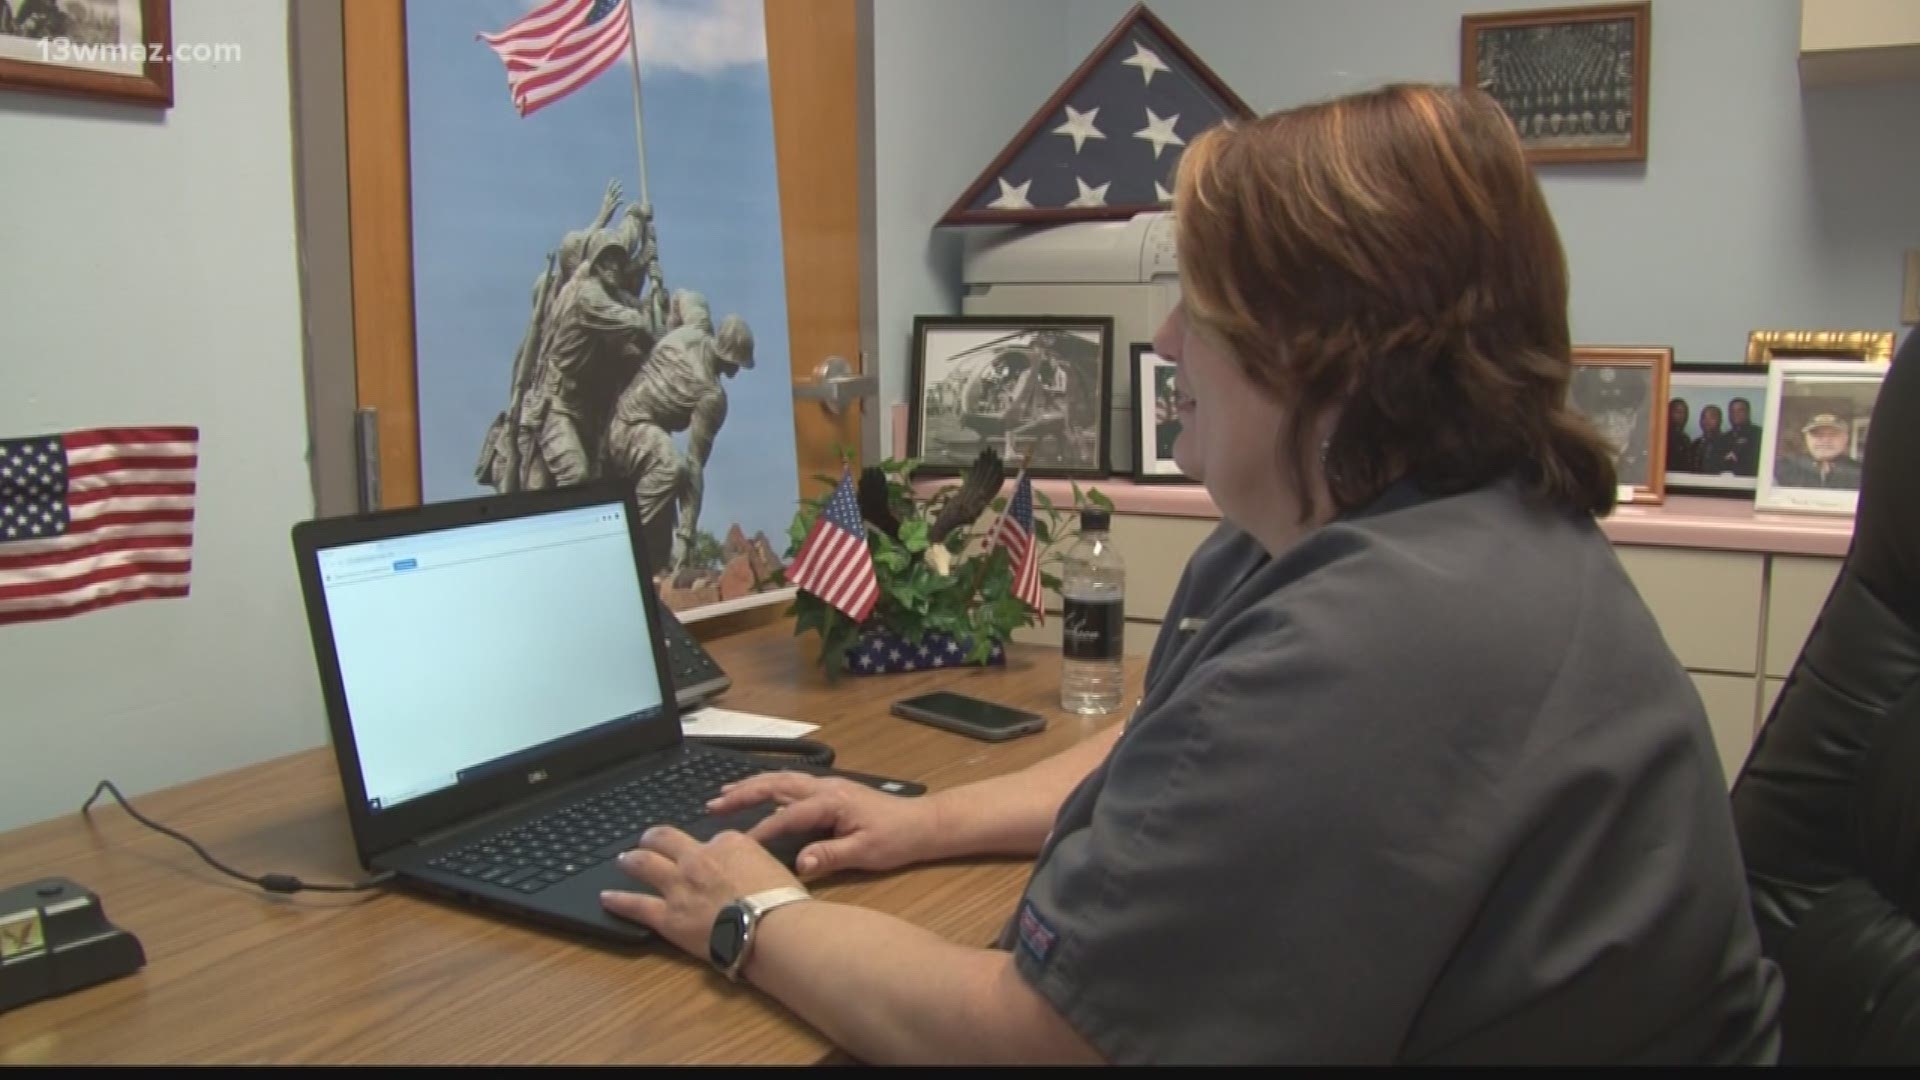 Veterans in Jones County now have a new place to take care of their health needs. It involves one room with a laptop and free internet access.